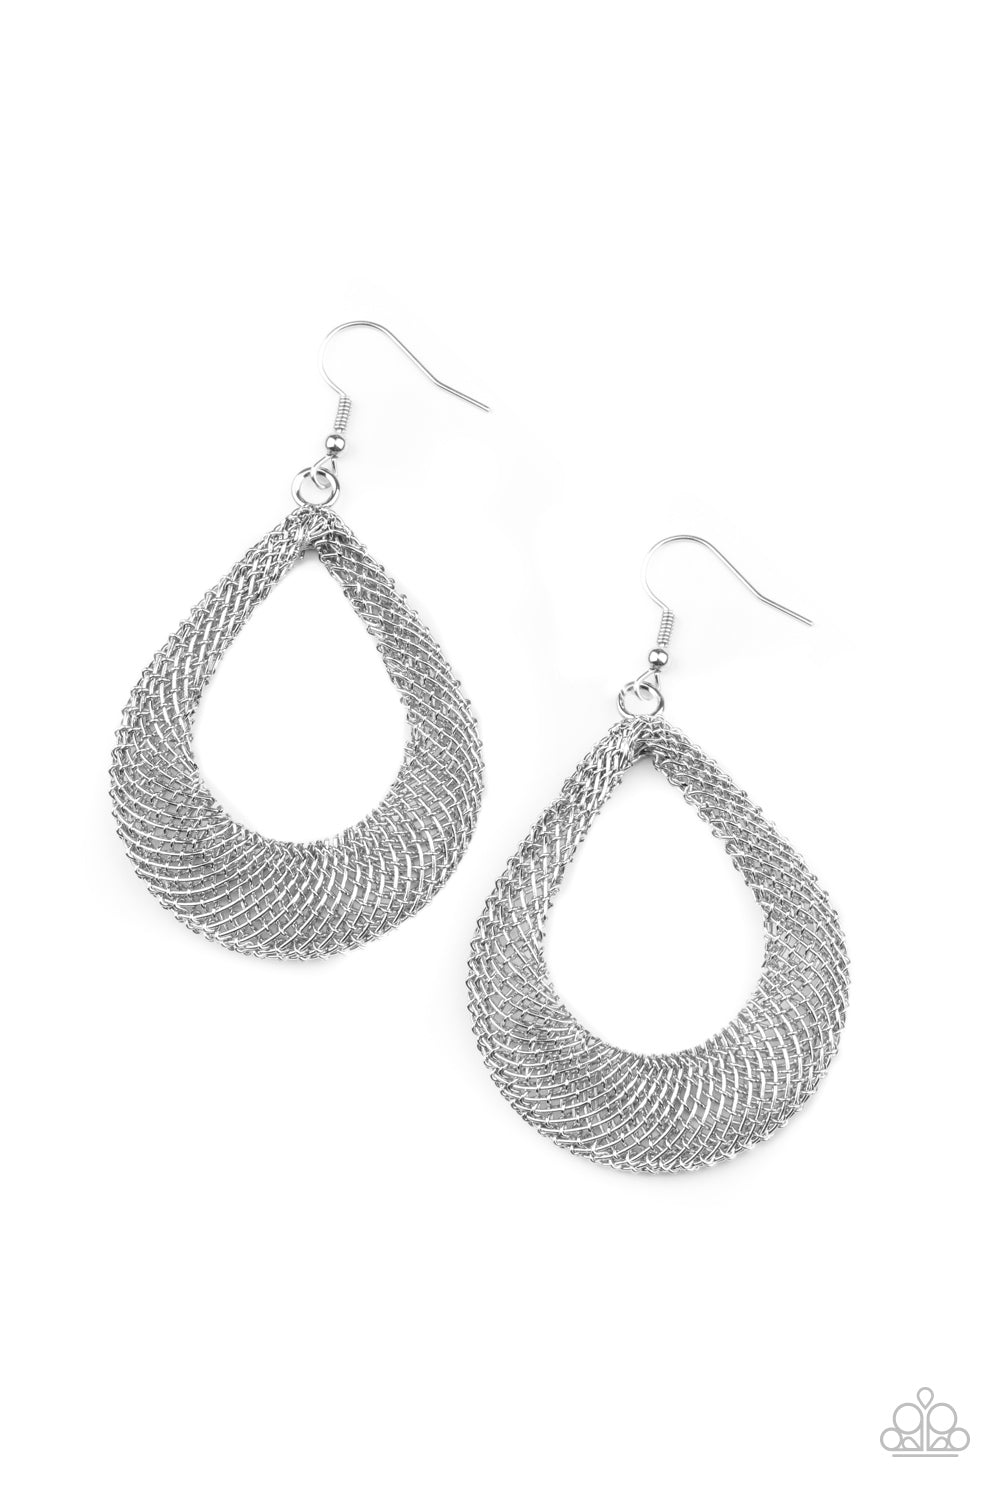 A Hot MESH - Silver Earrings - Paparazzi Accessories